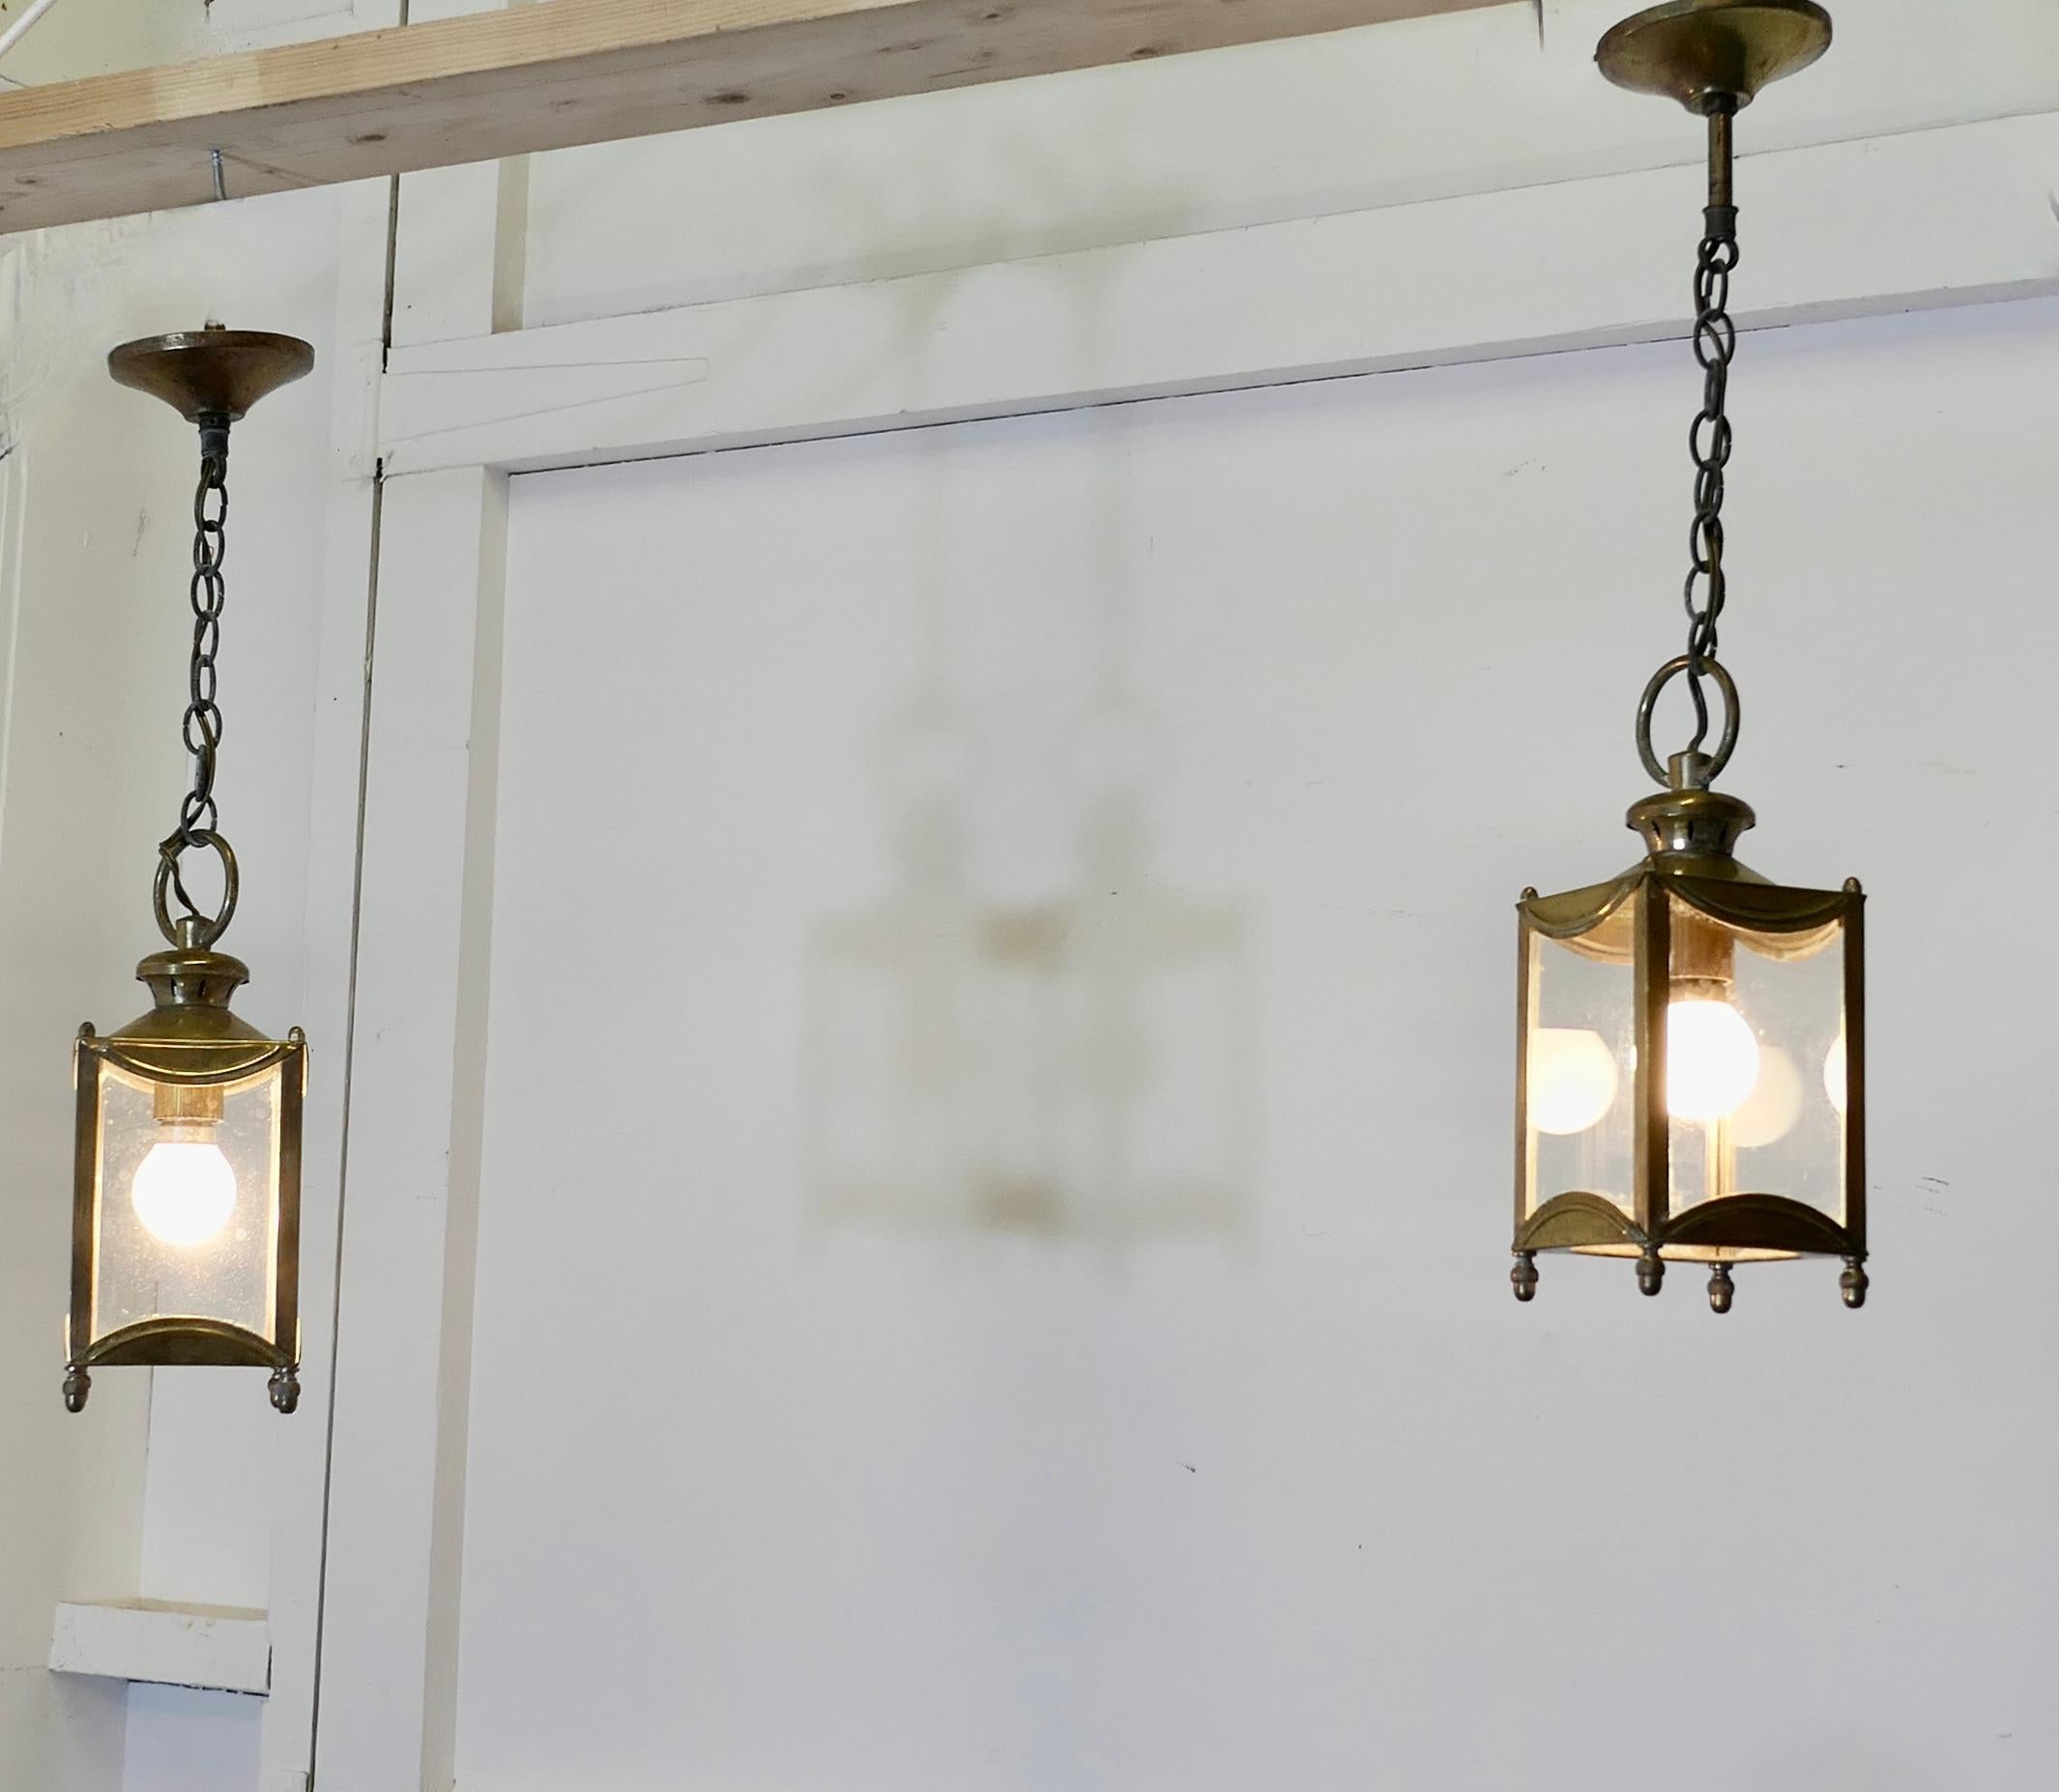 Petite Pair of French Brass and Glass Hall Lantern Lights

This is a lovely pair, each lamp has 4 sides and a rectangular shape, this very attractive pair give a bright light when lit, the lantern frames are brass and they each hang from a brass